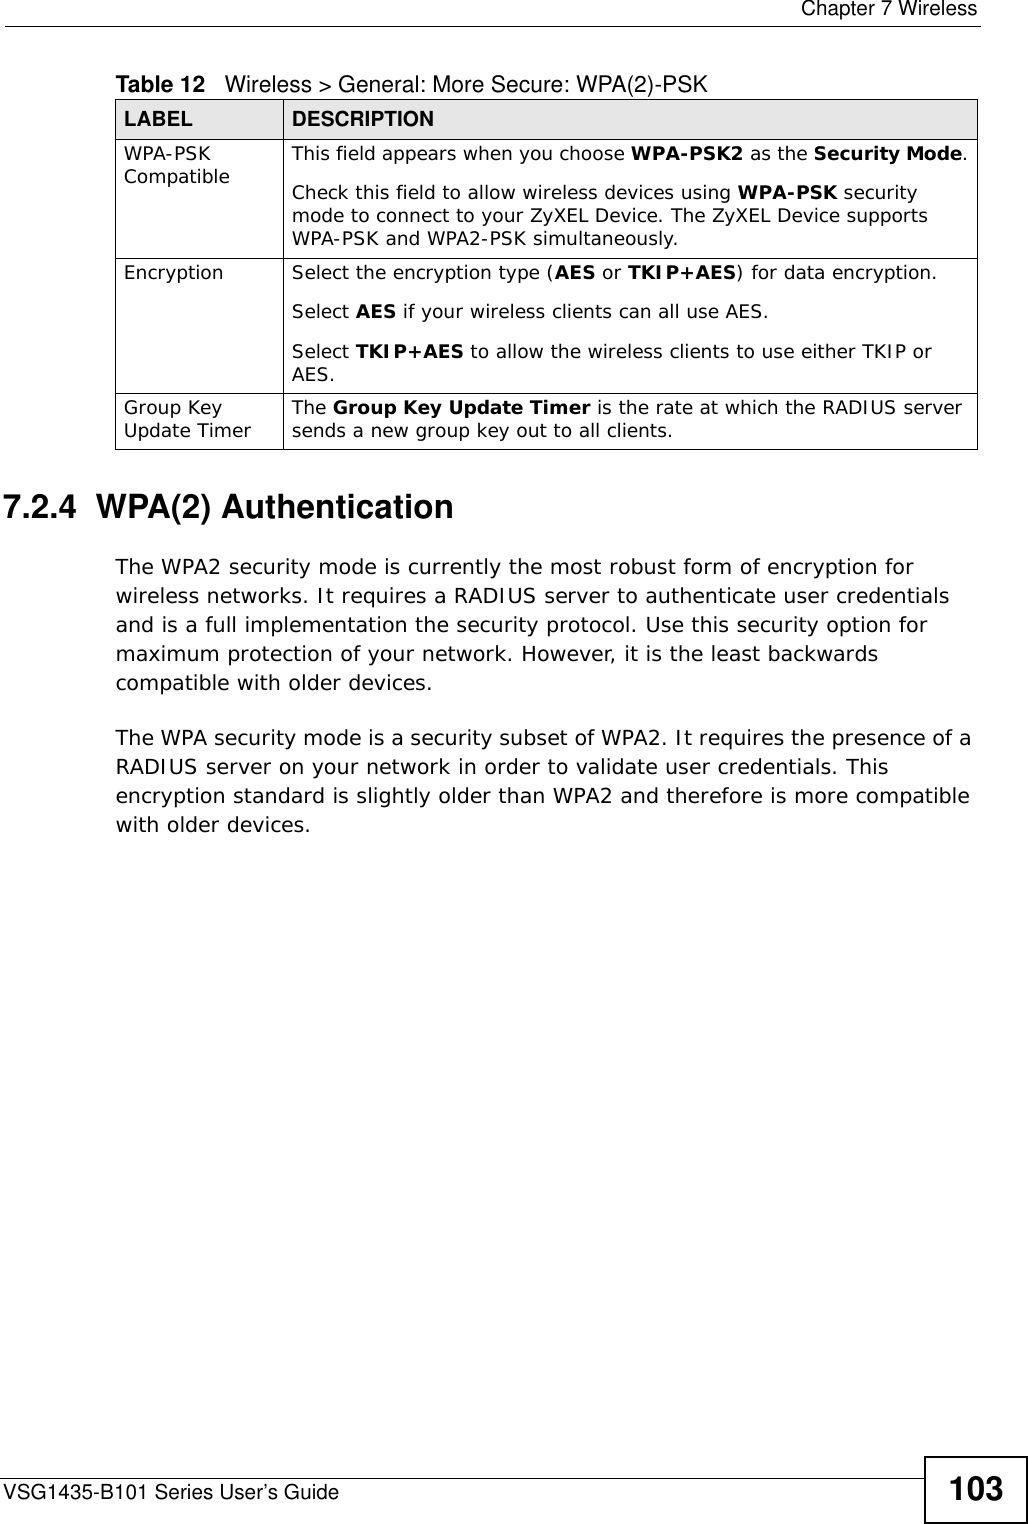  Chapter 7 WirelessVSG1435-B101 Series User’s Guide 1037.2.4  WPA(2) AuthenticationThe WPA2 security mode is currently the most robust form of encryption for wireless networks. It requires a RADIUS server to authenticate user credentials and is a full implementation the security protocol. Use this security option for maximum protection of your network. However, it is the least backwards compatible with older devices.The WPA security mode is a security subset of WPA2. It requires the presence of a RADIUS server on your network in order to validate user credentials. This encryption standard is slightly older than WPA2 and therefore is more compatible with older devices.WPA-PSK Compatible This field appears when you choose WPA-PSK2 as the Security Mode.Check this field to allow wireless devices using WPA-PSK security mode to connect to your ZyXEL Device. The ZyXEL Device supports WPA-PSK and WPA2-PSK simultaneously.Encryption Select the encryption type (AES or TKIP+AES) for data encryption.Select AES if your wireless clients can all use AES.Select TKIP+AES to allow the wireless clients to use either TKIP or AES.Group Key Update Timer The Group Key Update Timer is the rate at which the RADIUS server sends a new group key out to all clients.  Table 12   Wireless &gt; General: More Secure: WPA(2)-PSKLABEL DESCRIPTION